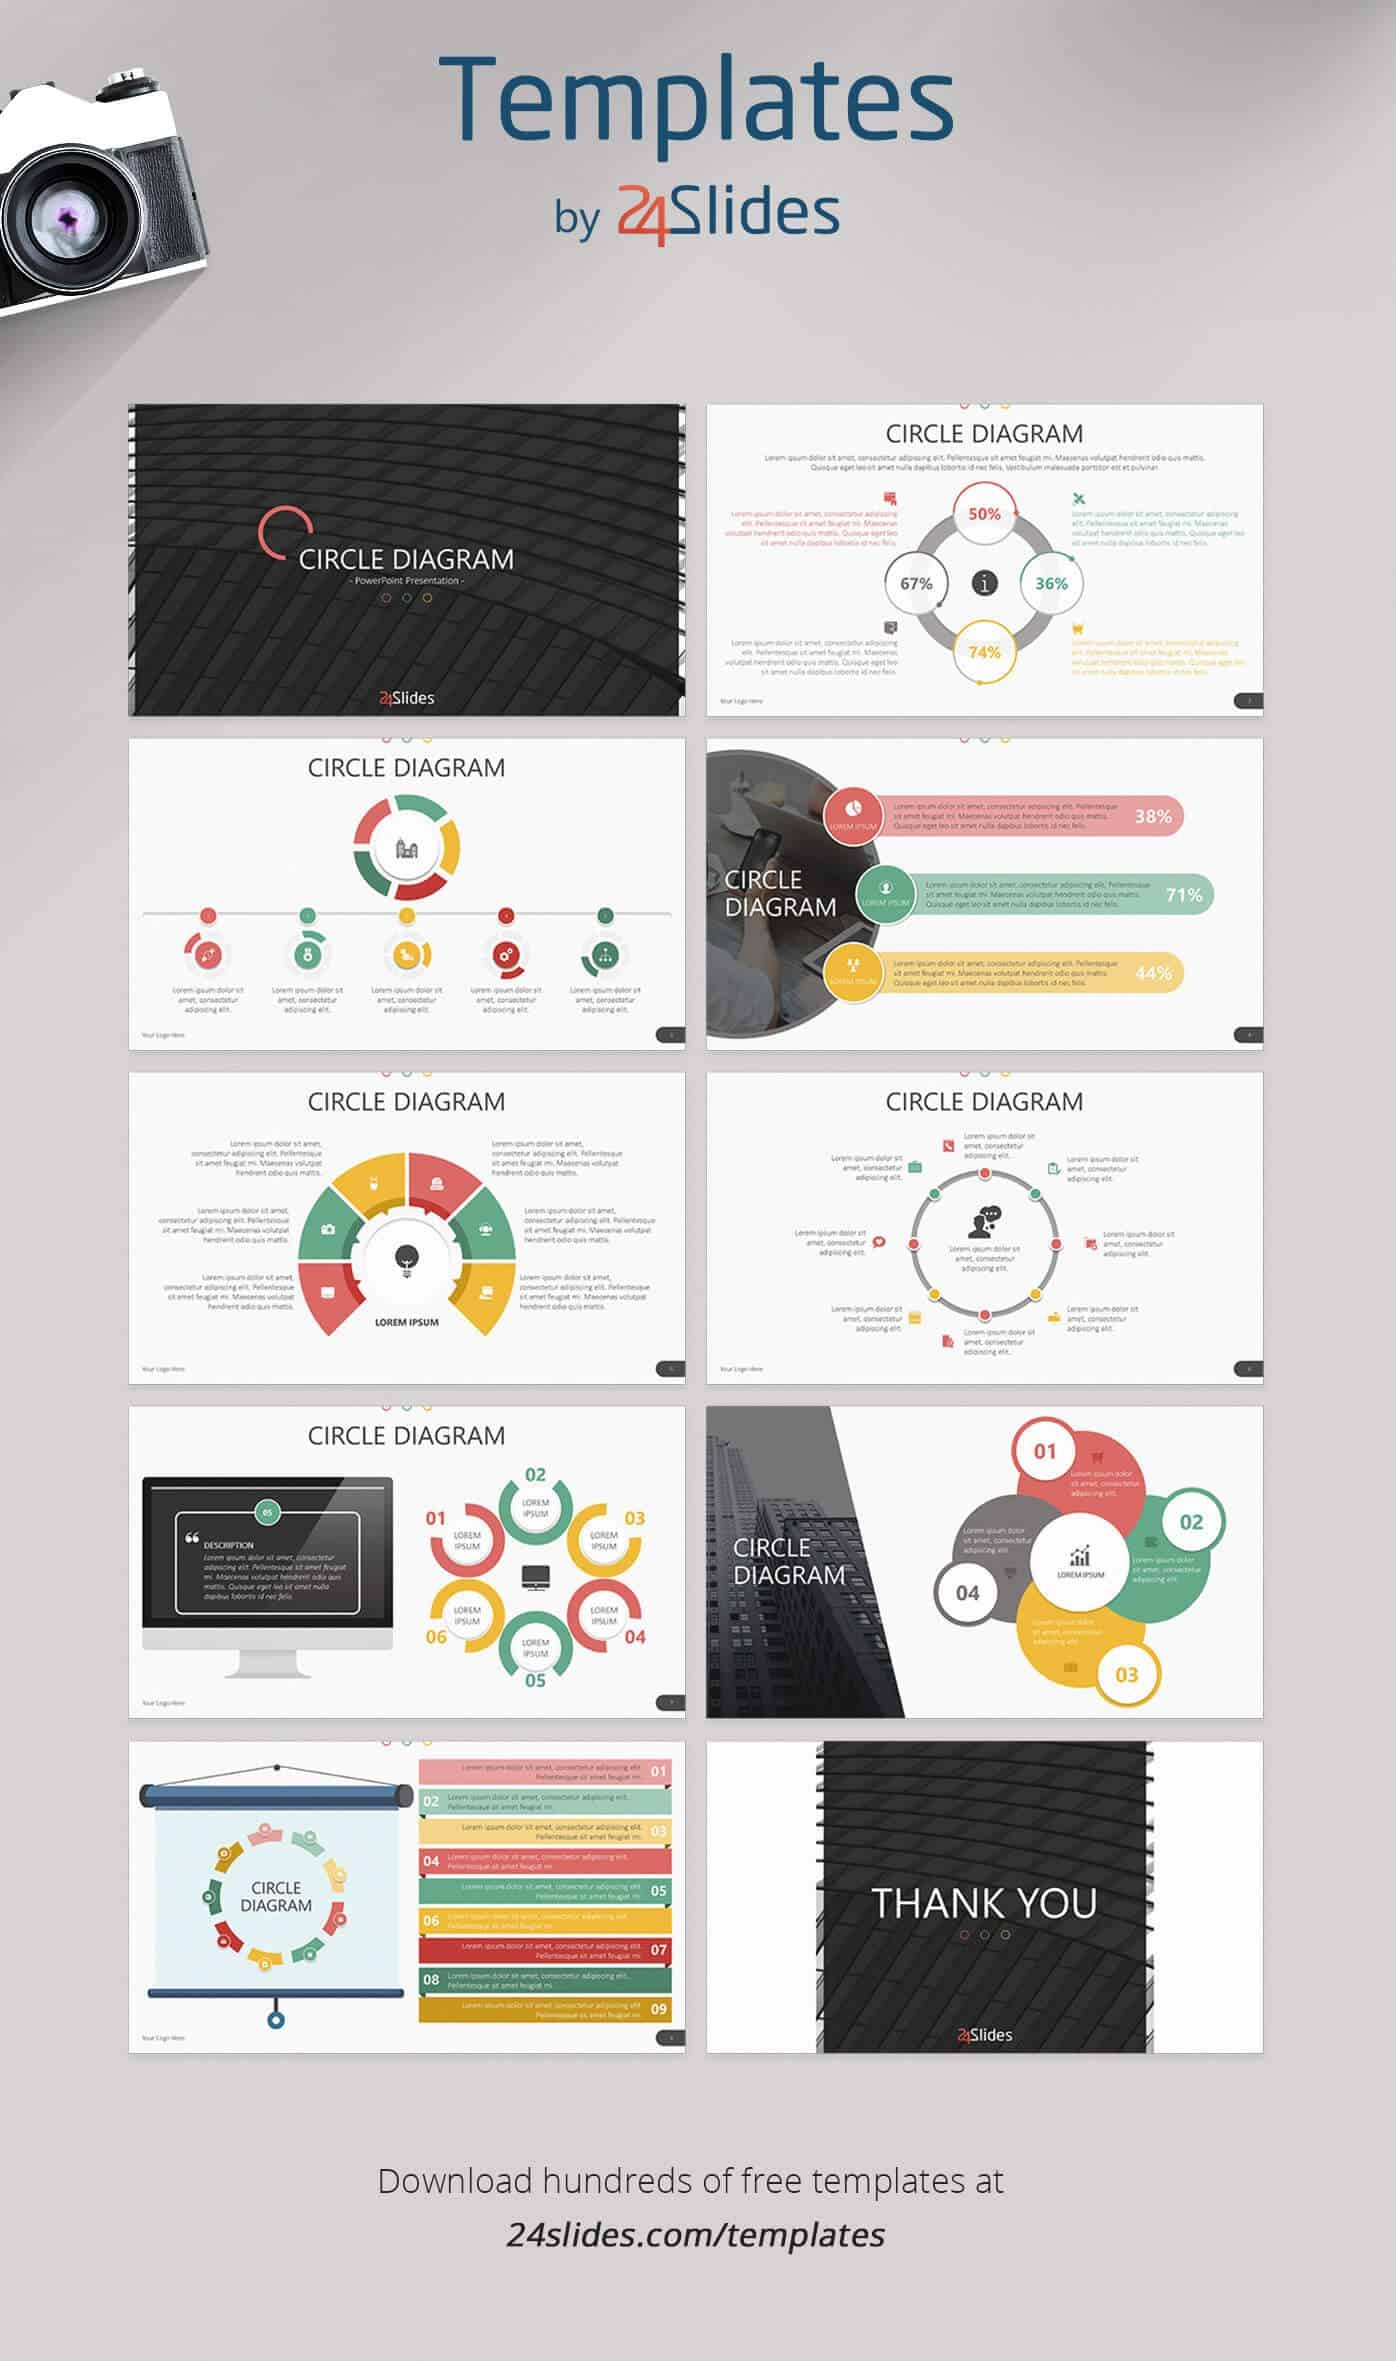 Fun And Colorful Free Powerpoint Templates  Present Better within Fun Powerpoint Templates Free Download